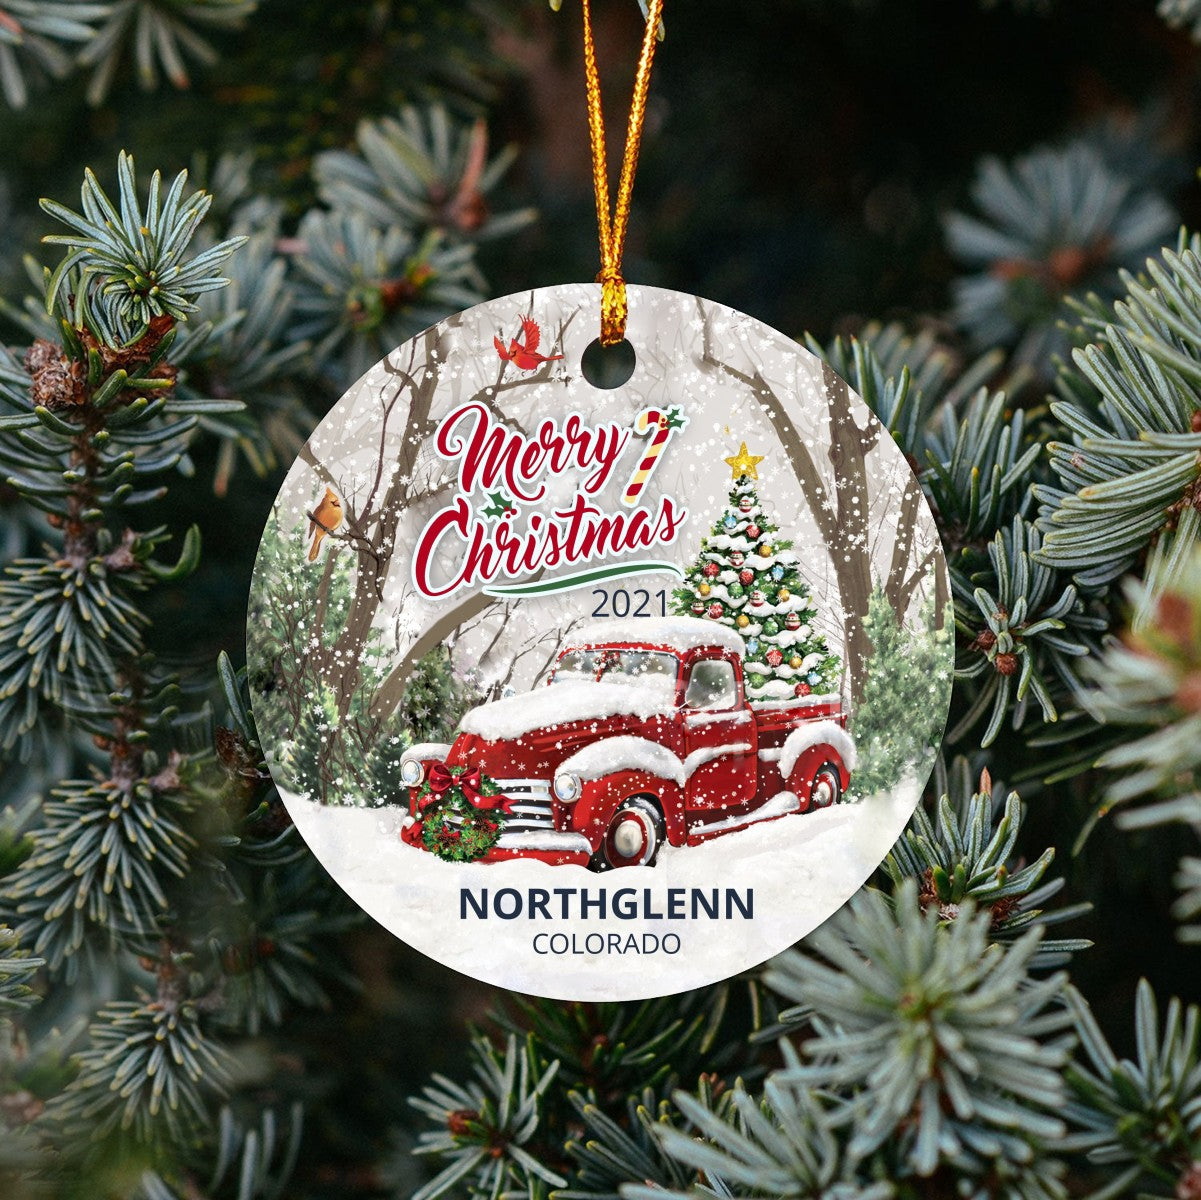 Christmas Tree Ornaments Northglenn - Ornament Customize With Name City And State Northglenn Colorado CO - Red Truck Xmas Ornaments 3'' Plastic Gift For Family, Friend And Housewarming